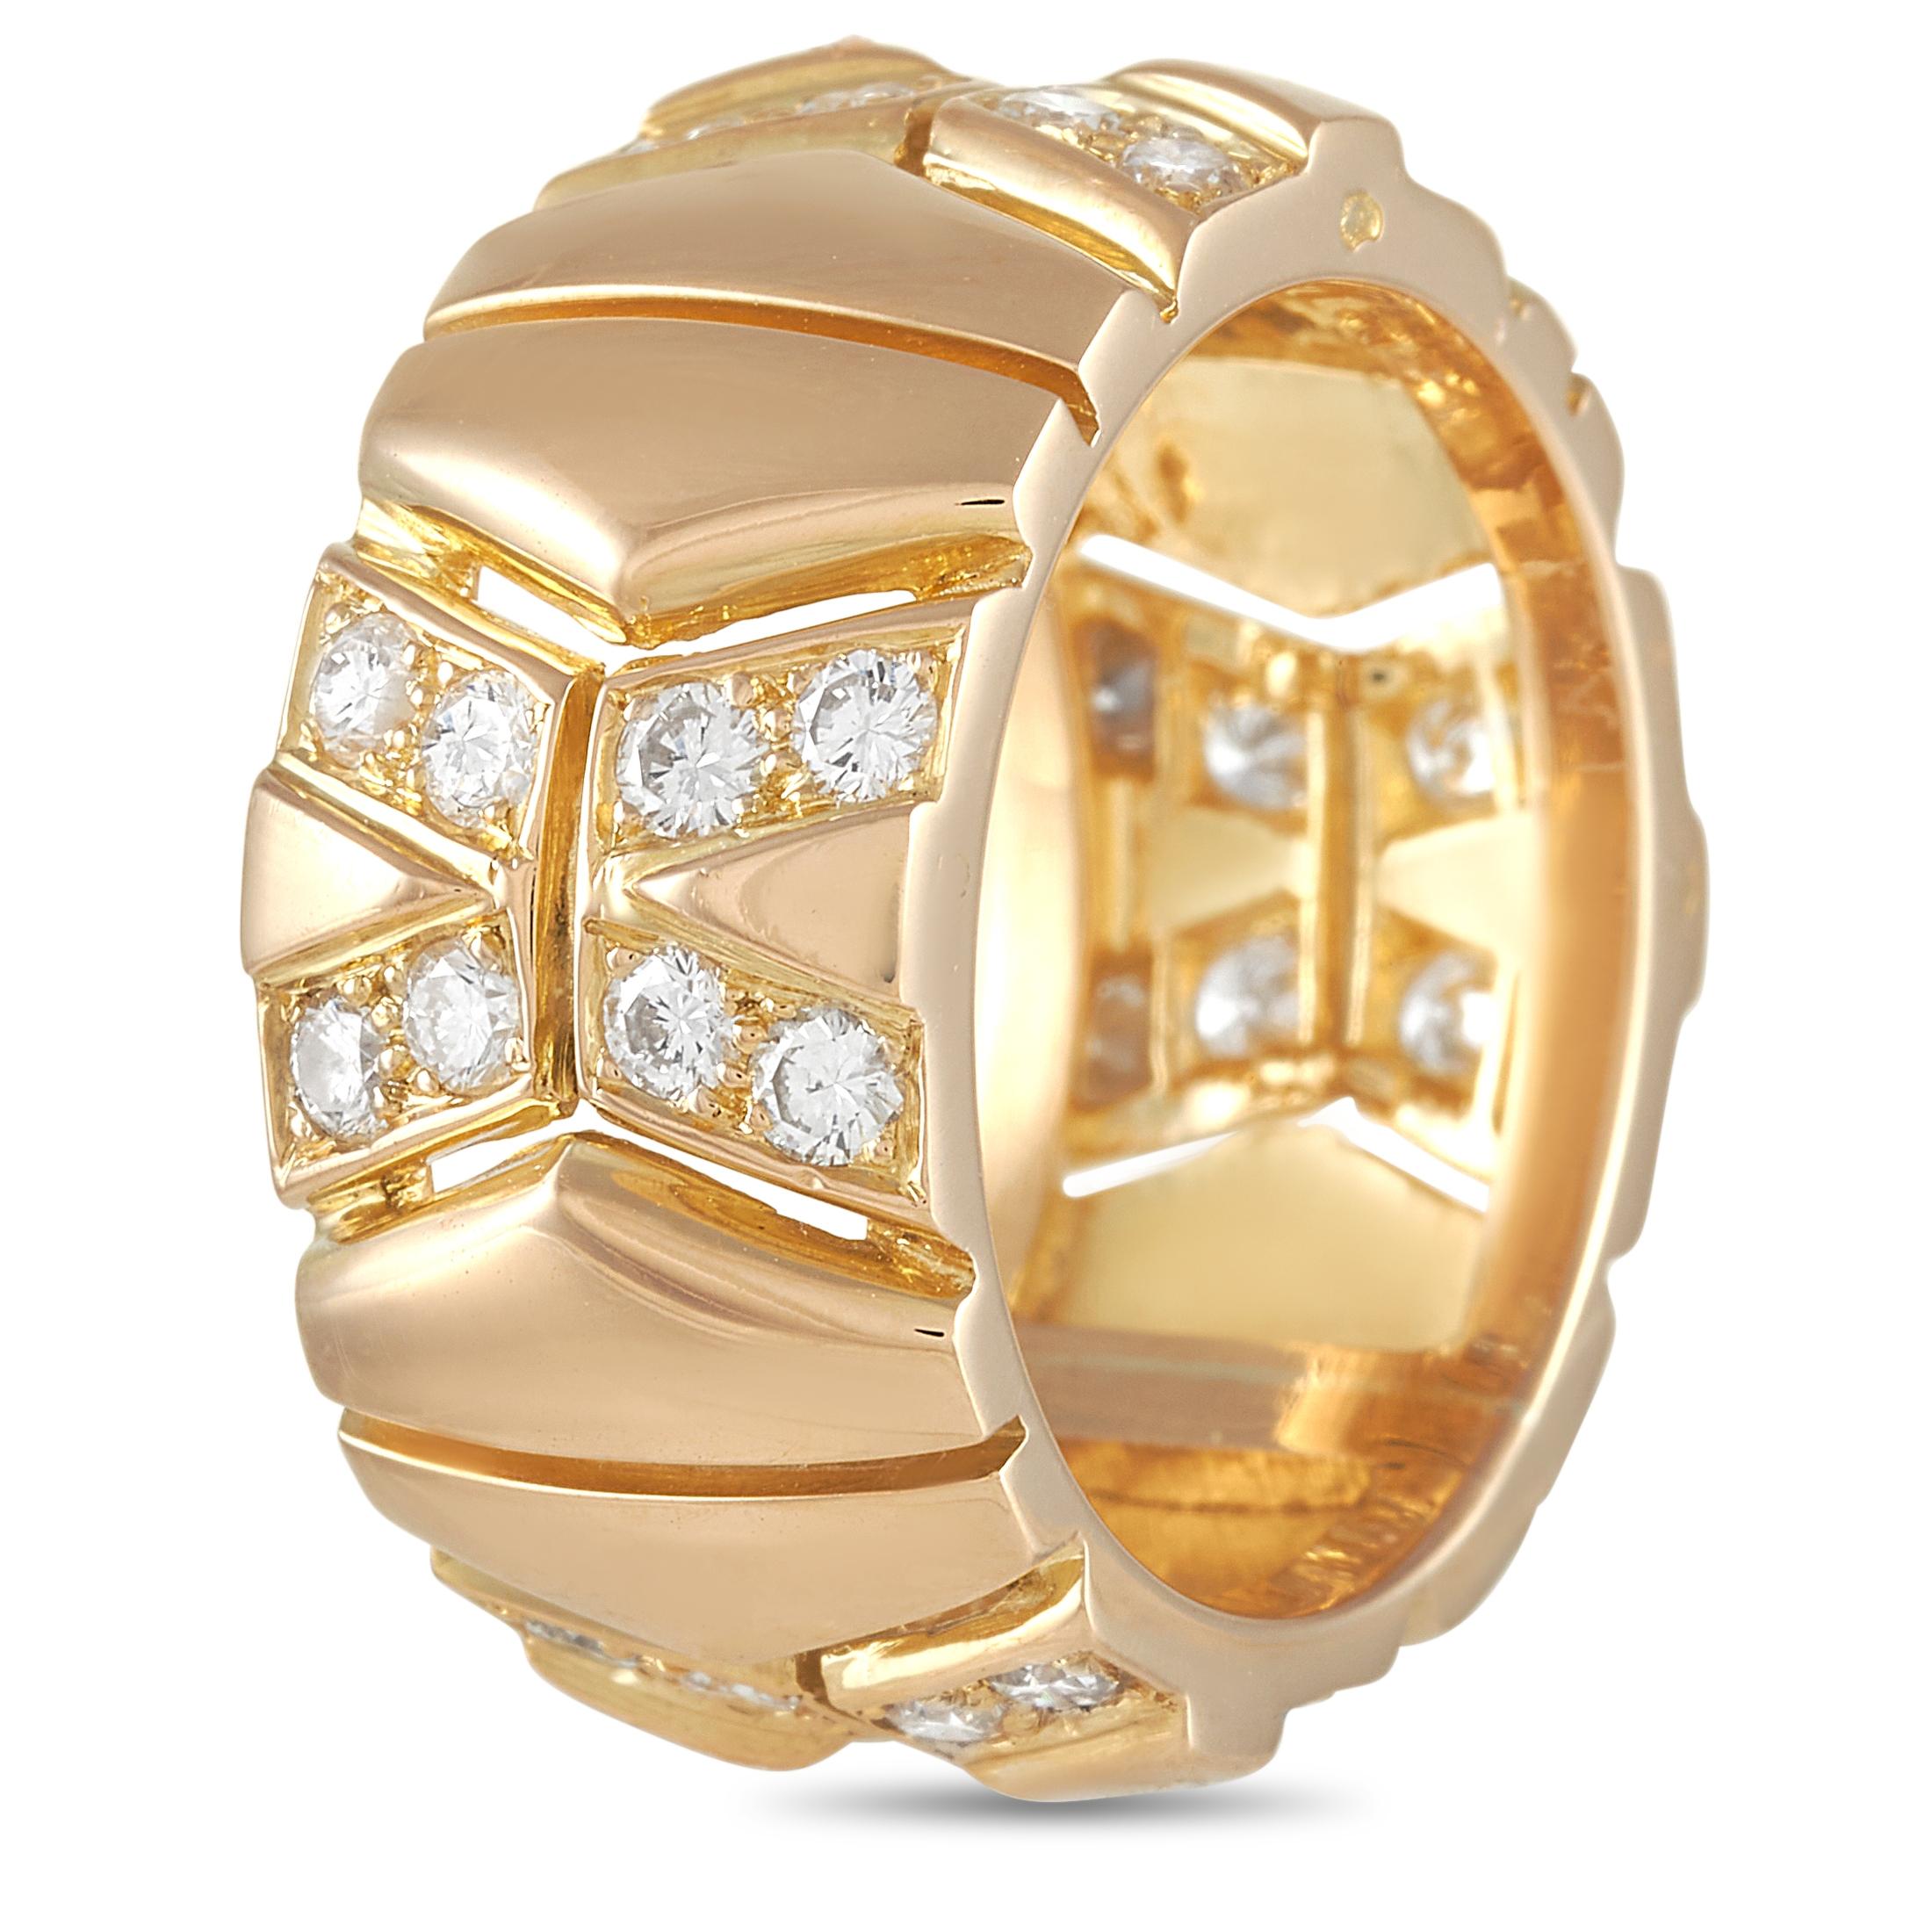 This lovely Cartier 18K Yellow Gold 1.00 ct Diamond Band Ring is a statement piece. The ring is made with a thick 18K yellow gold band and set with 1.00 carats of round diamonds of E color and VVS Clarity in an X pattern spaced out around the band.